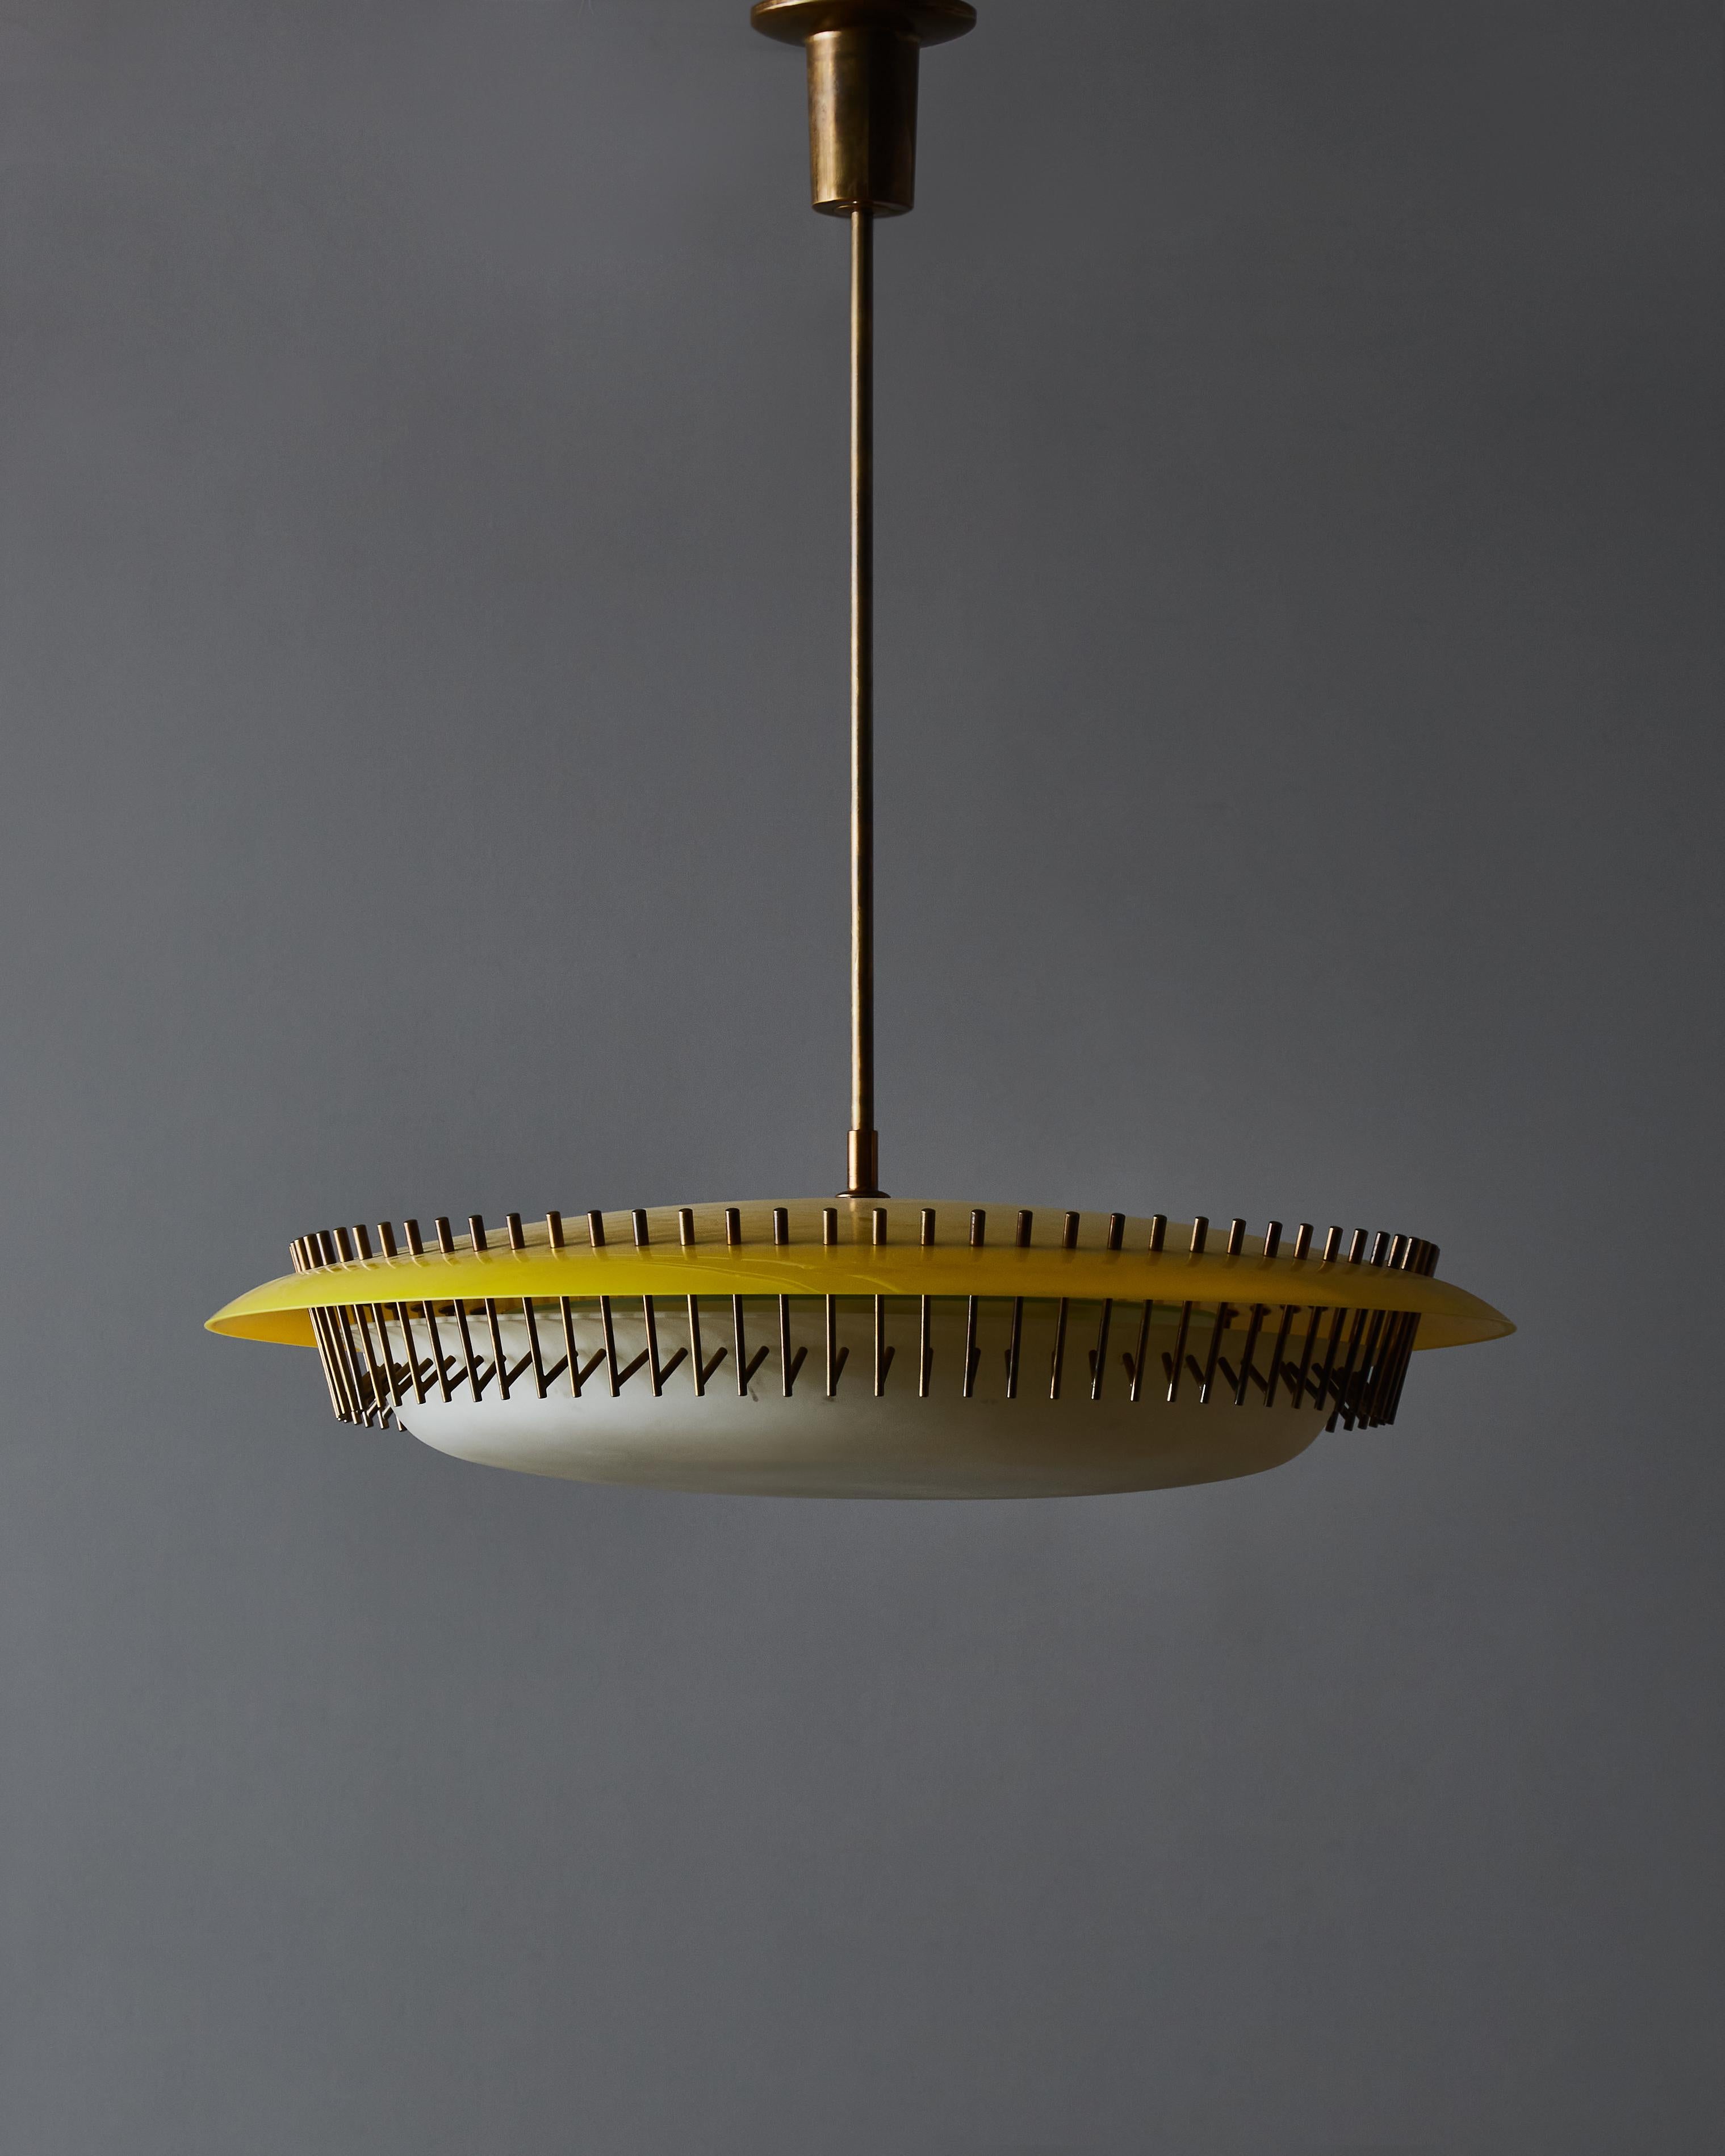 Rare chandelier model 12697 designed by Angelo Lelli for Arredoluce in 1958.
It’s made of a frosted glass bowl hold by distinctive brass hooks attached to a plexi dome in the signature yellow colour of Arredoluce.
 